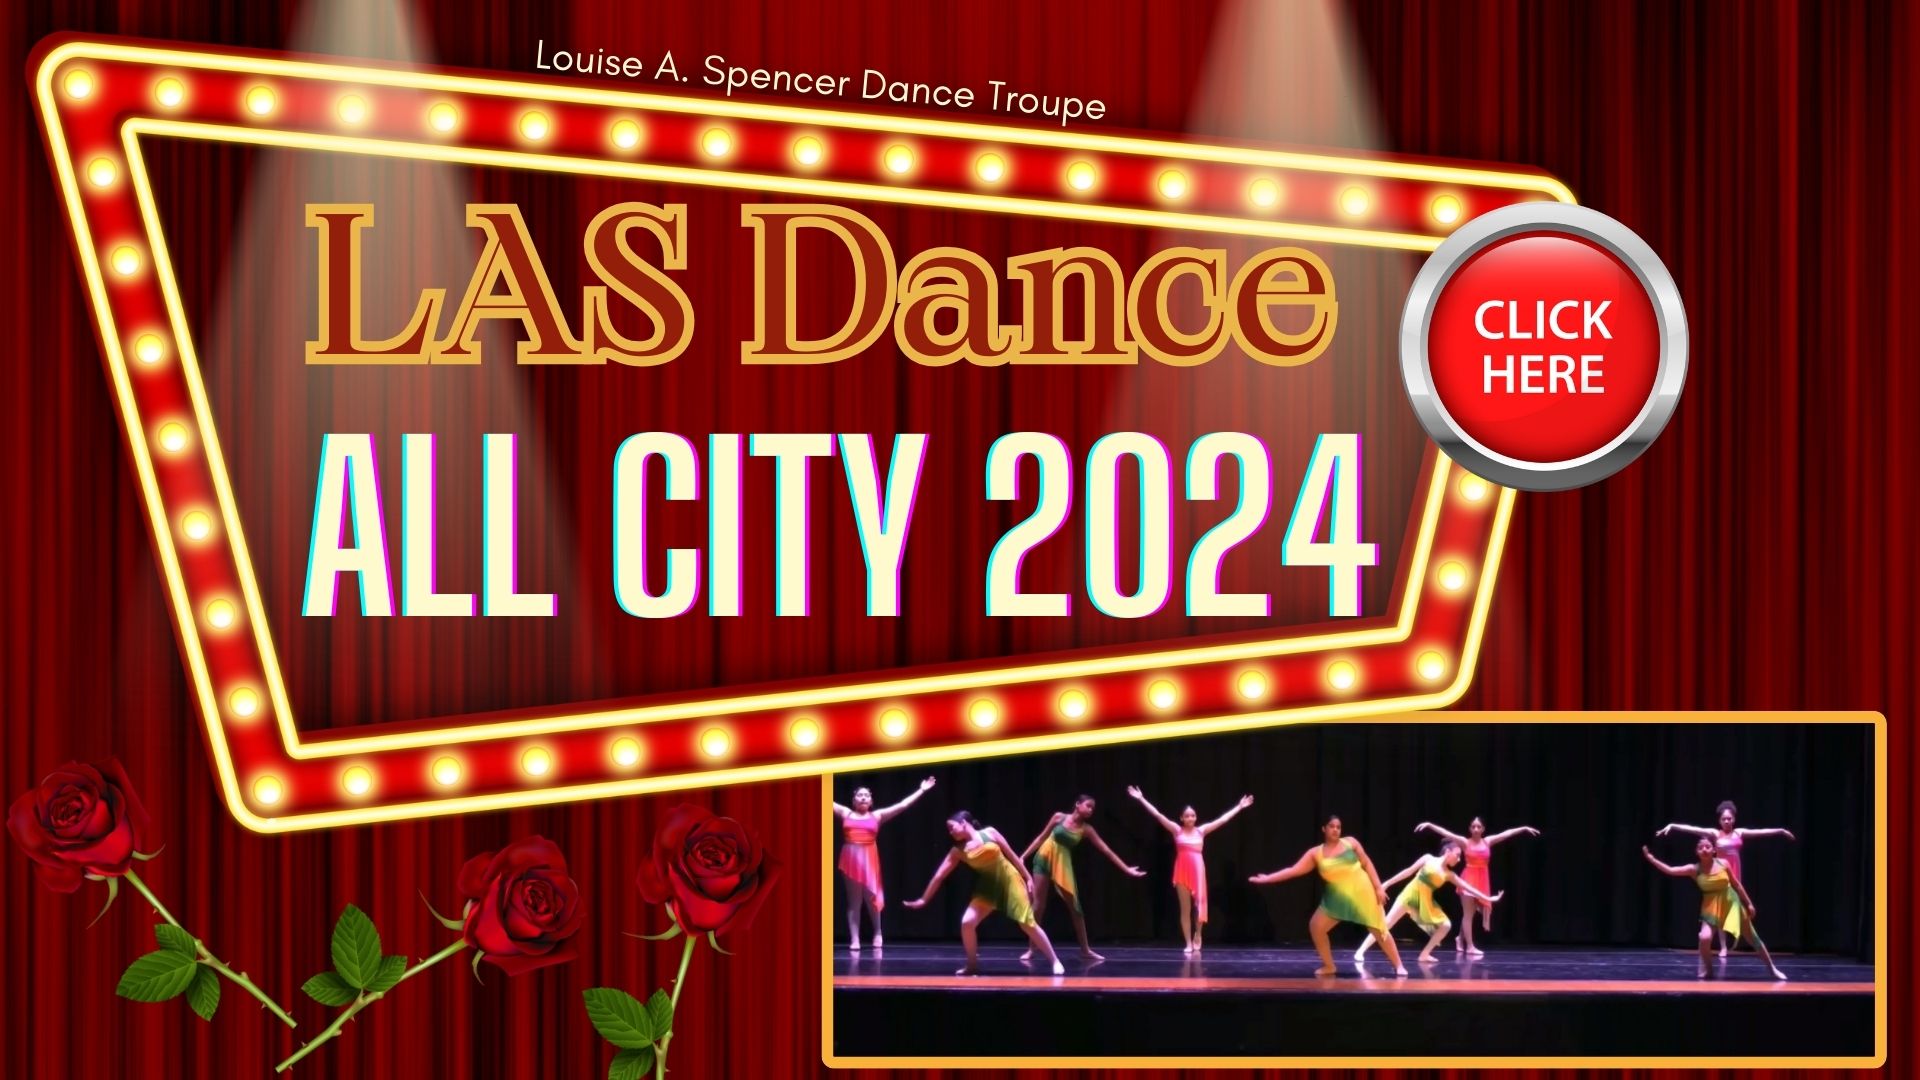 LAS All City Dance 2024 link to video